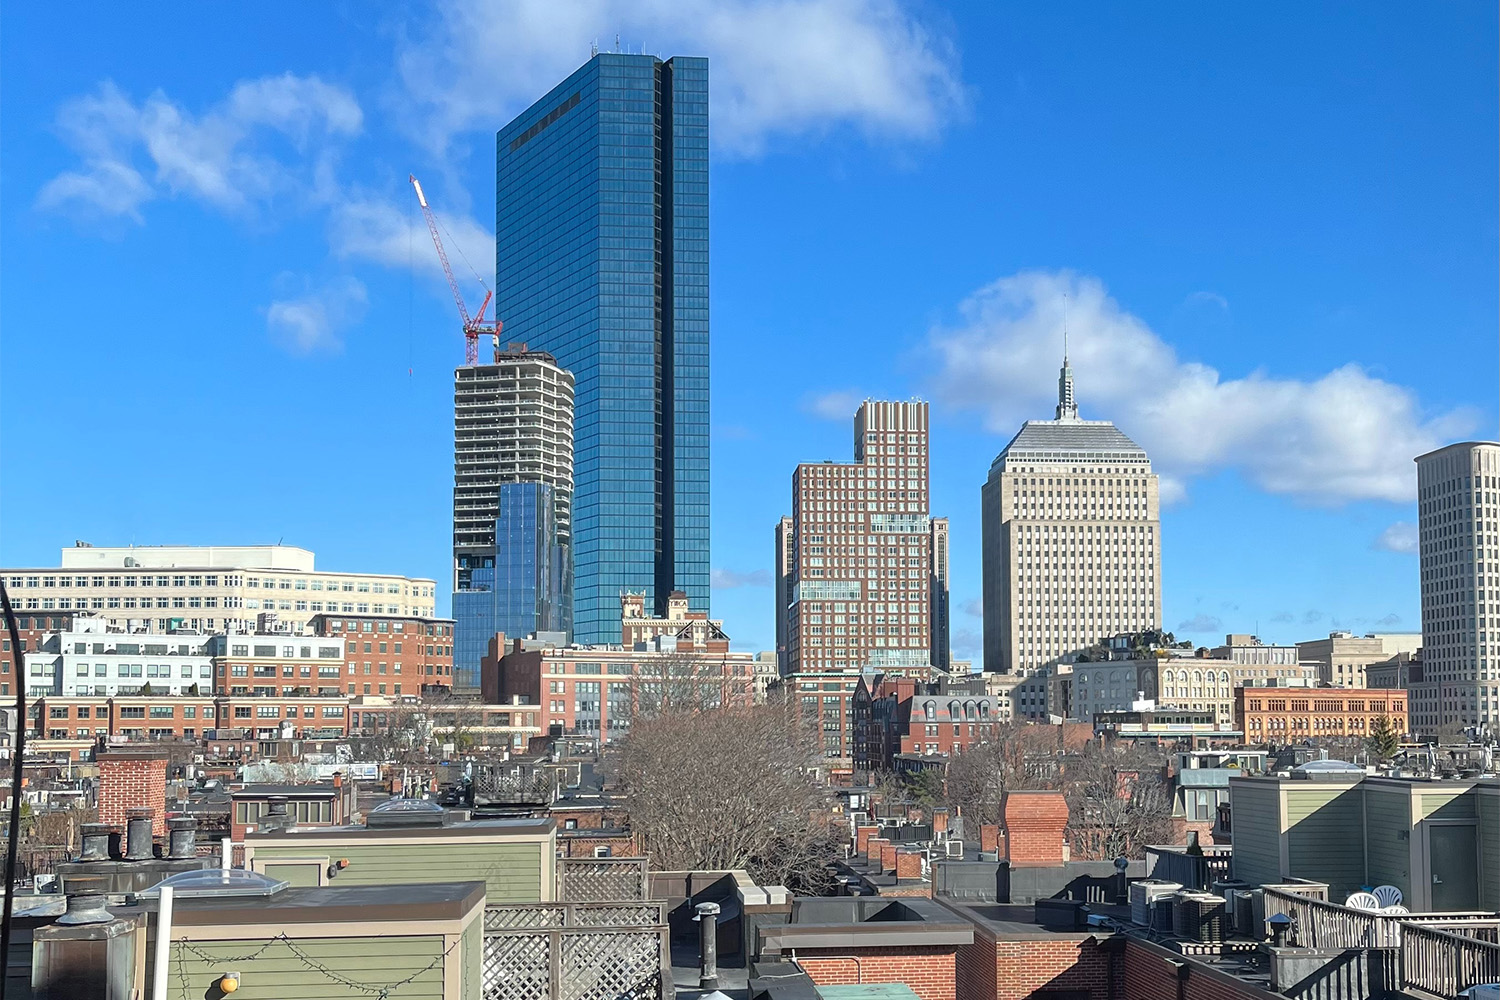 Skyline view of Boston, with view of the John Hancock Tower 